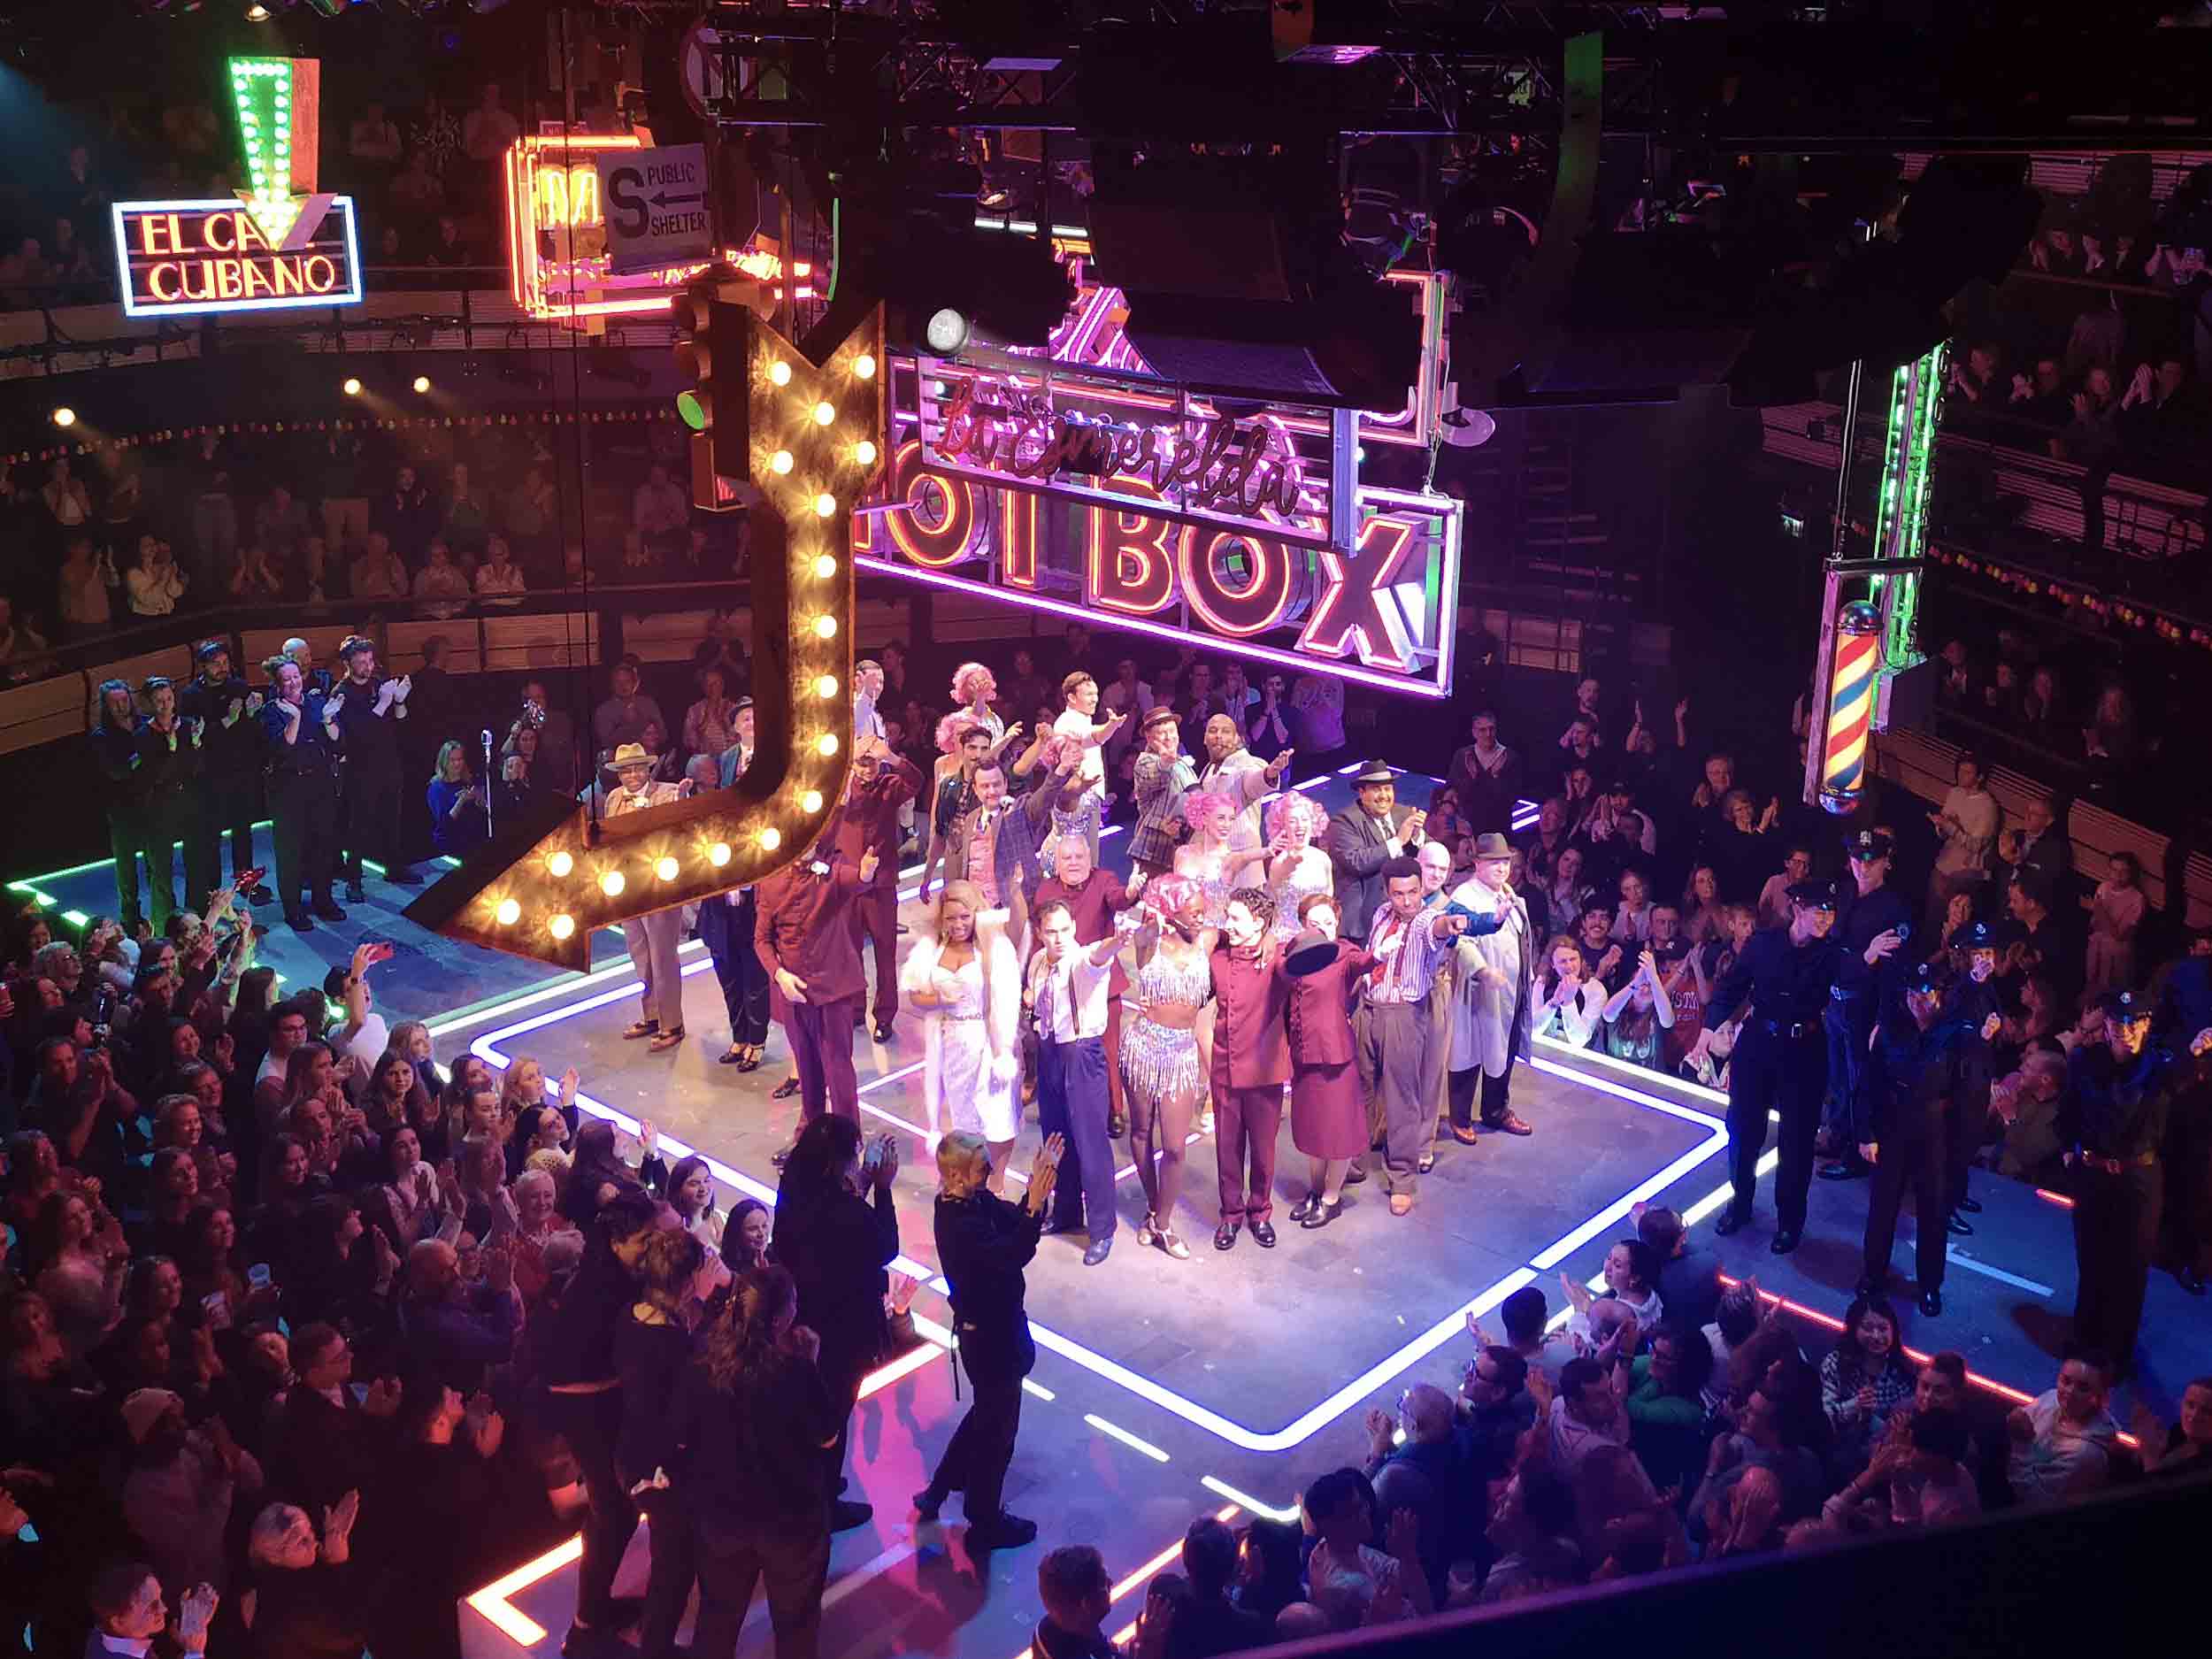 Looking down on the large cast of Guys and Dolls, closely huddled into a sqaure on the stage, all with one arm aloft. To all sides we see crowds of clapping people. Above them all are numerous neon signs. 